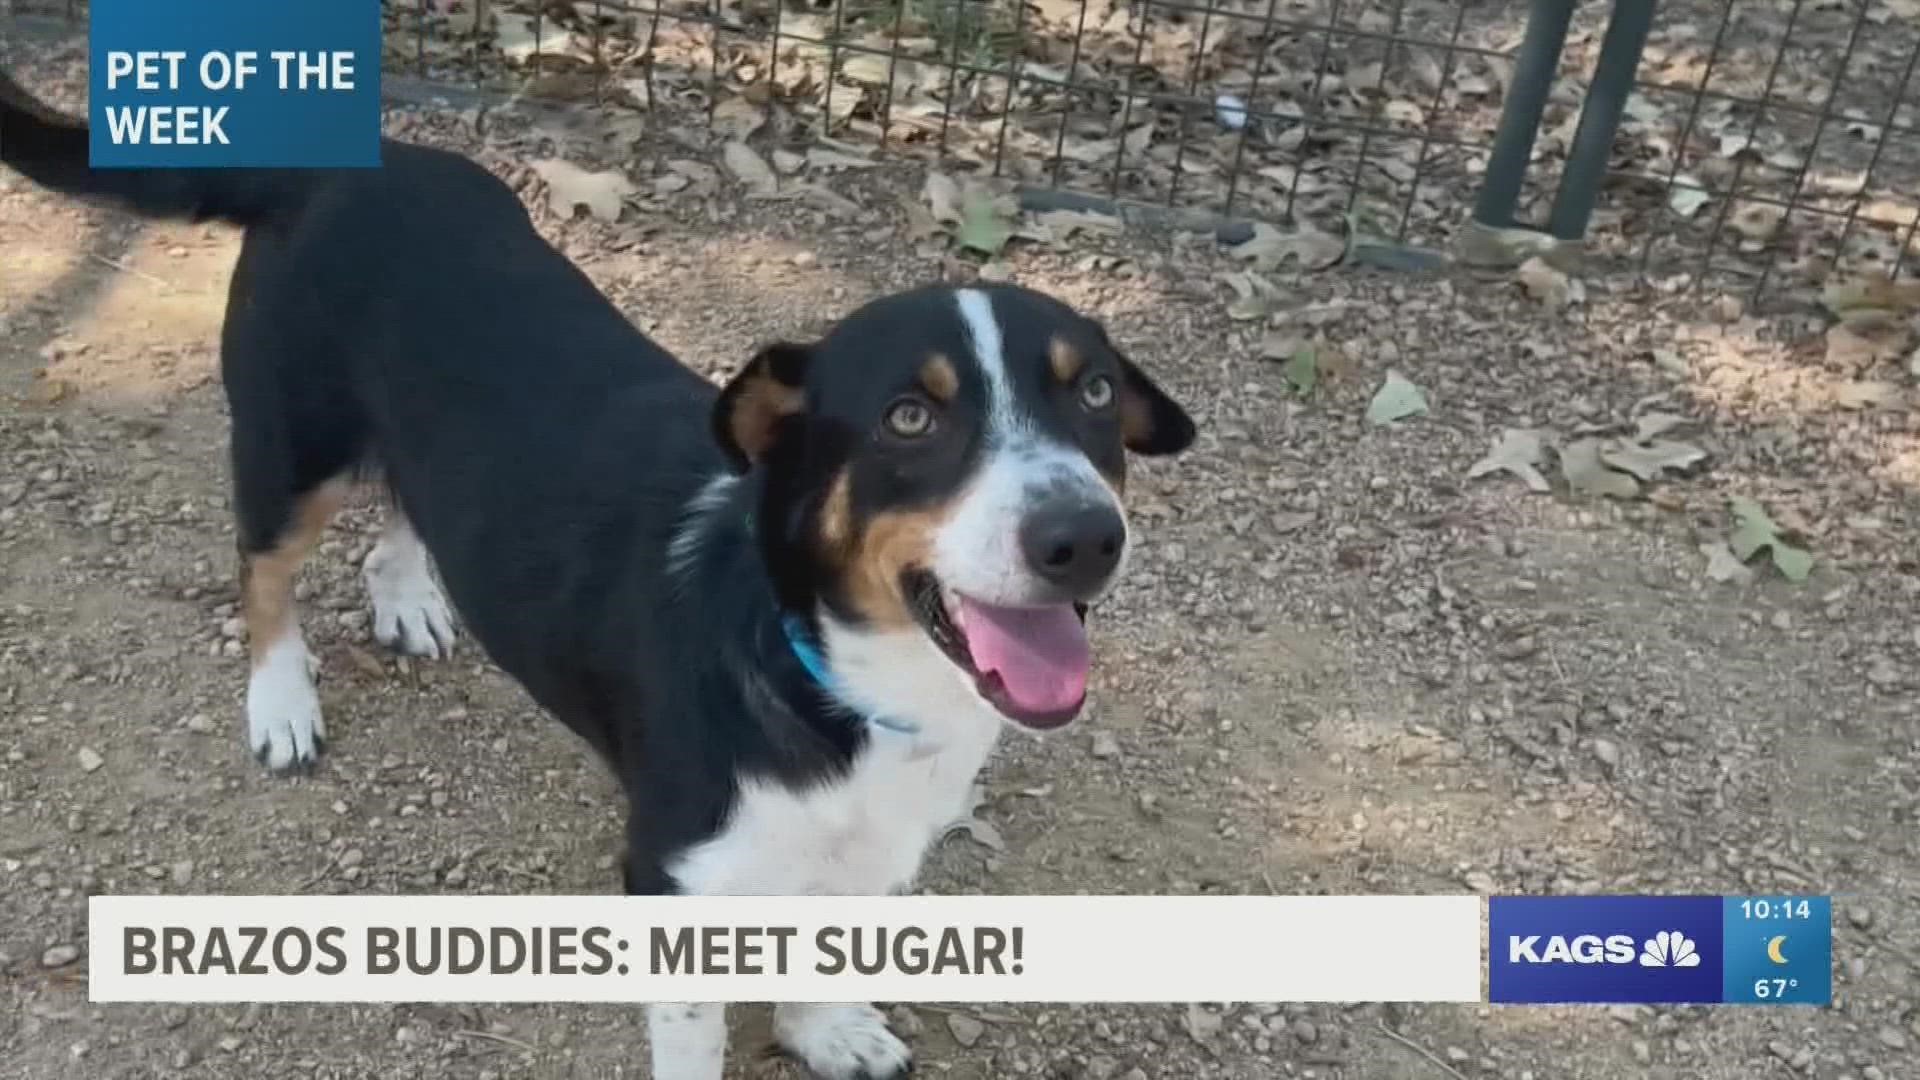 This week's featured Brazos Buddy is Sugar, a one-year-old terrier mix that's looking for his forever home.